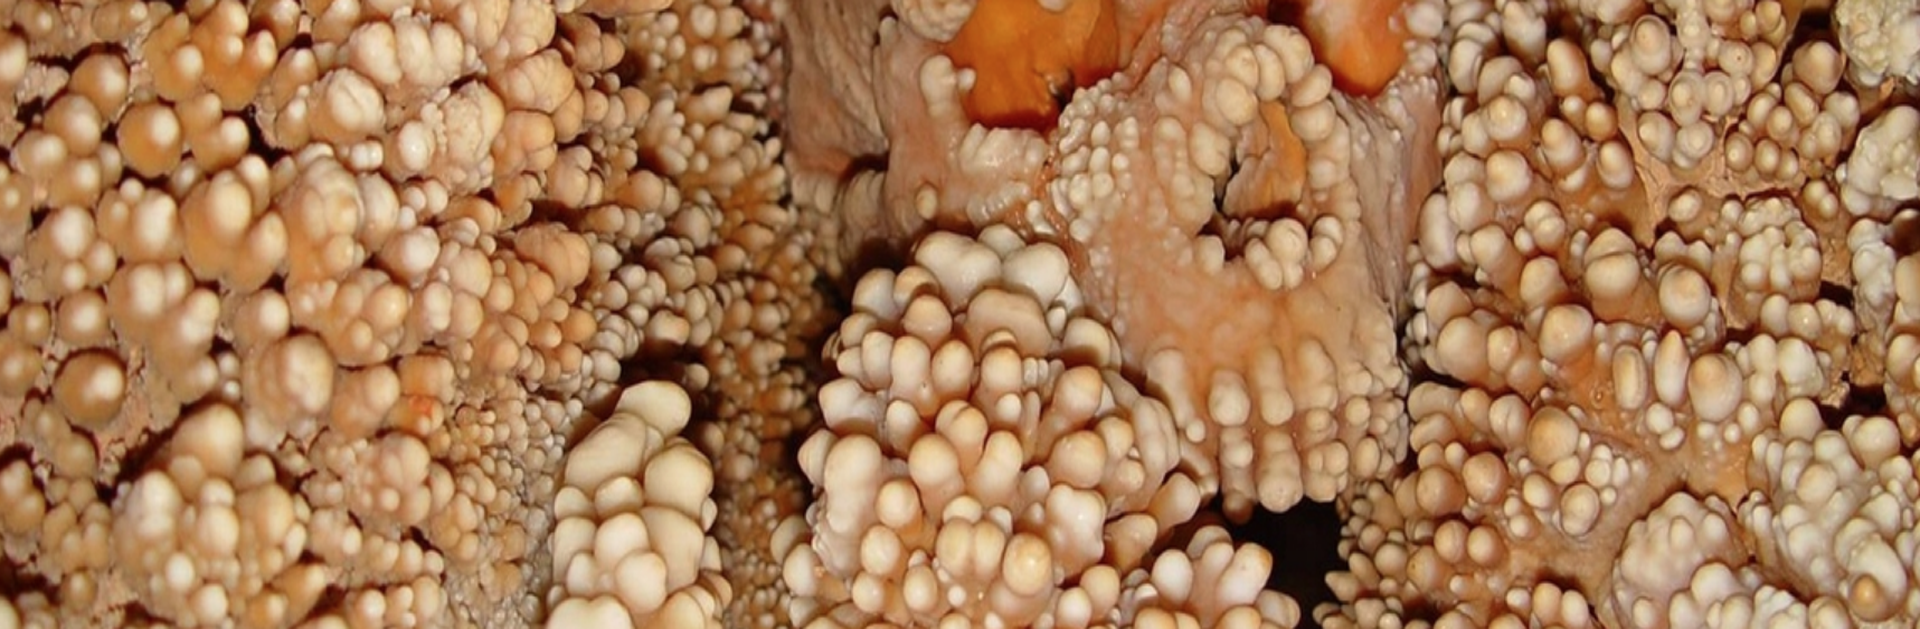 They manage to reconstruct the skull of Altamura man, a Neanderthal from 150,000 years ago